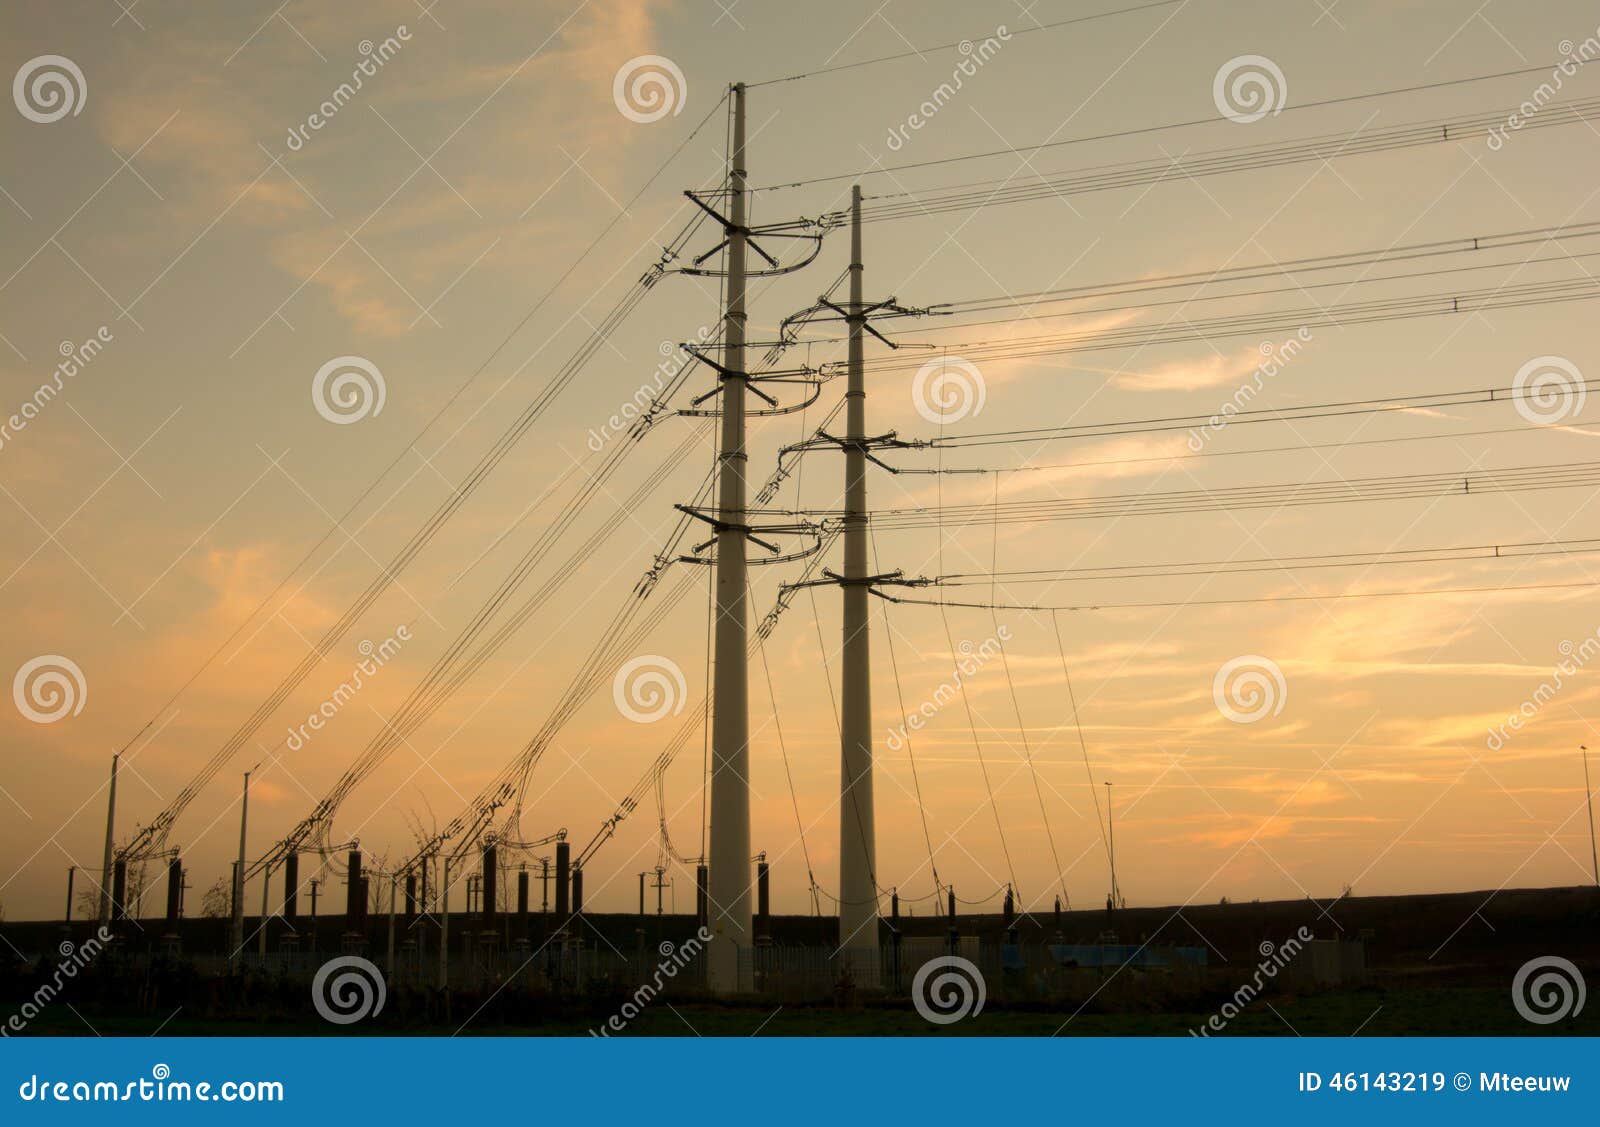 electricity pylons with orange background